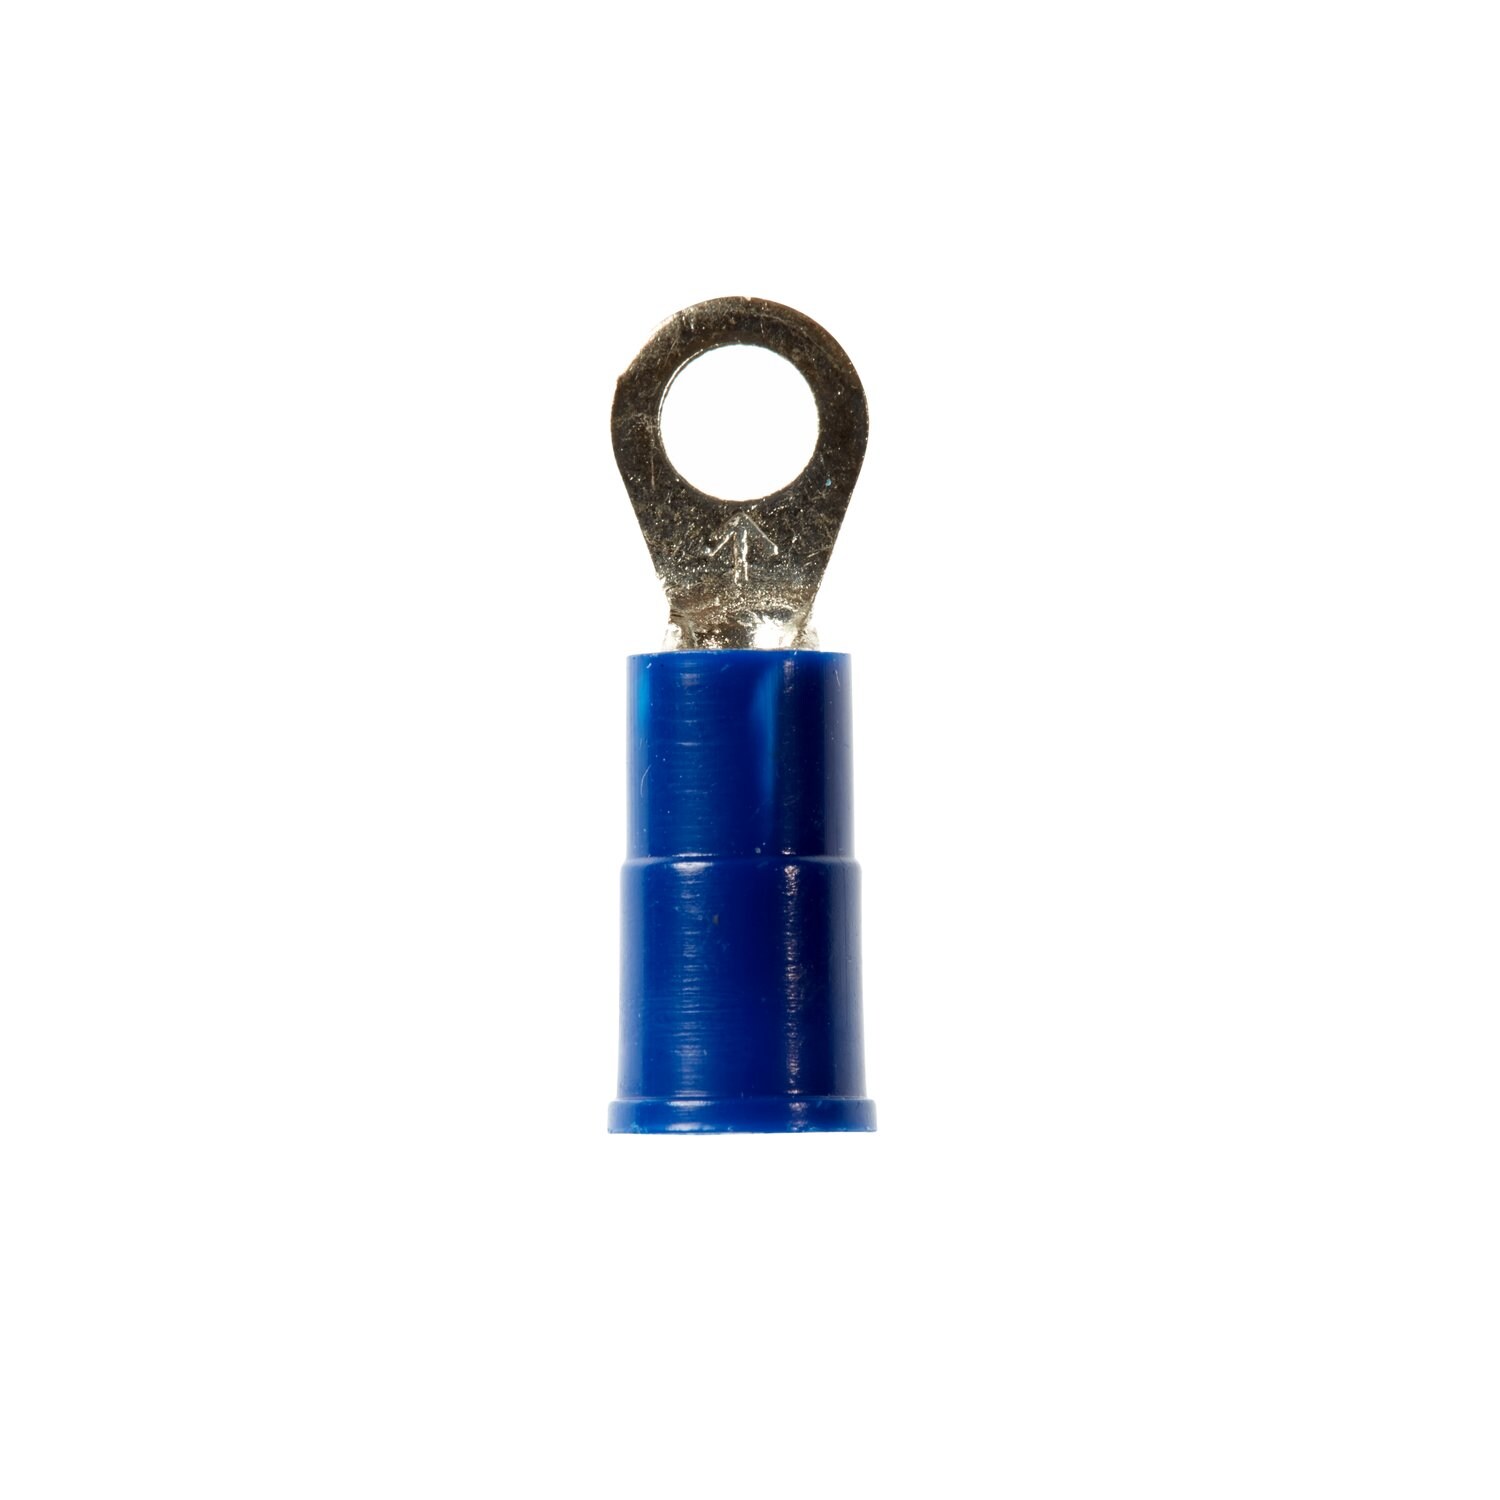 7000133331 - 3M Scotchlok Ring Vinyl Insulated, 100/bottle, MV14-6R/SX,
standard-style ring tongue fits around the stud, 500/Case